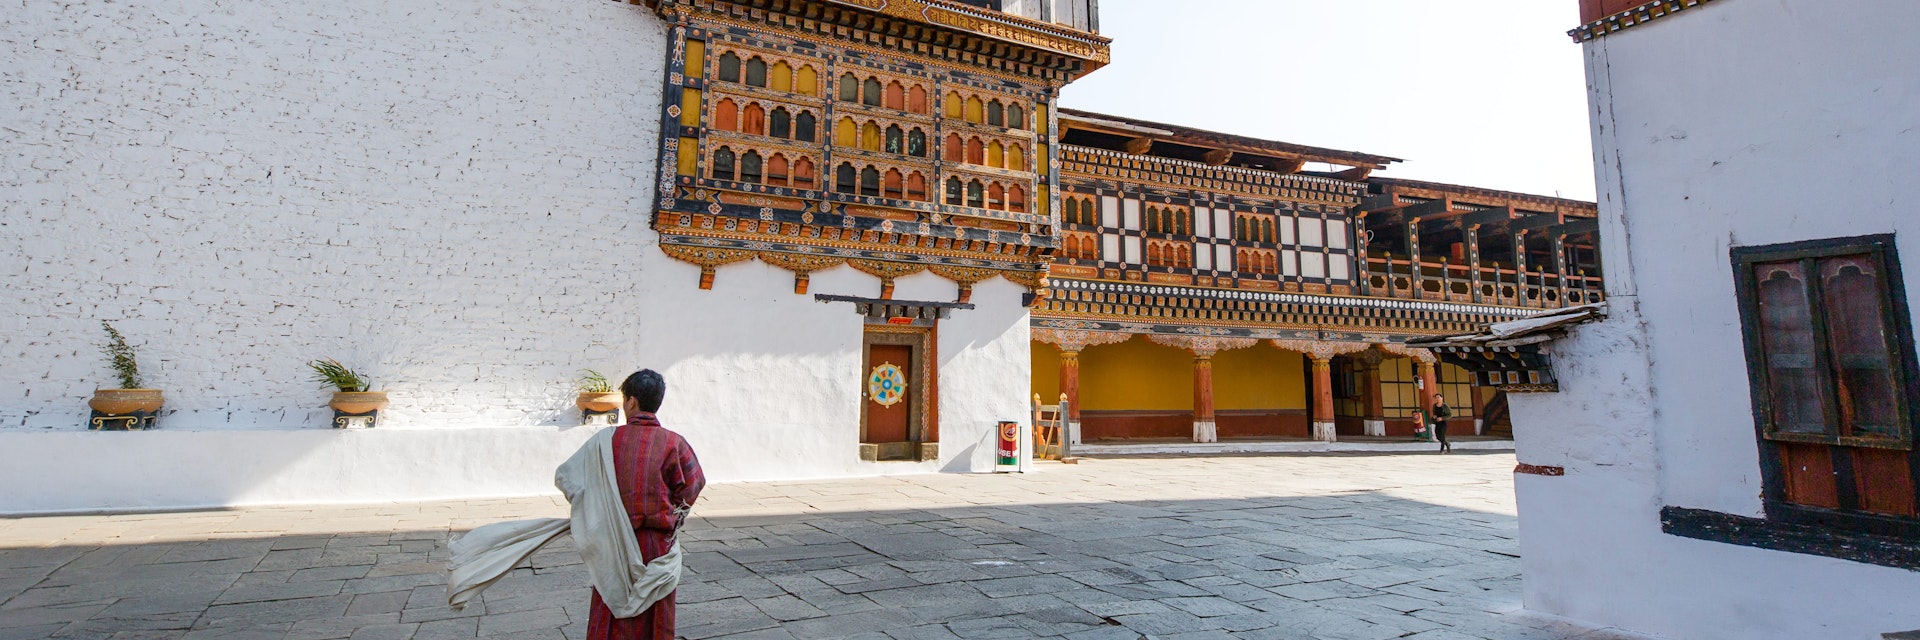 A local guide standing still while wearing a traditional clothing for men called Gho a knee length and kimono-like cloth held in place by a belt called Kera. Rinpung Dzong is an architectural feat housing a network of courtyards, temples and offices. Its full name is Rinche Pung Dzong which literally means Fortress on a Heap of Jewels.